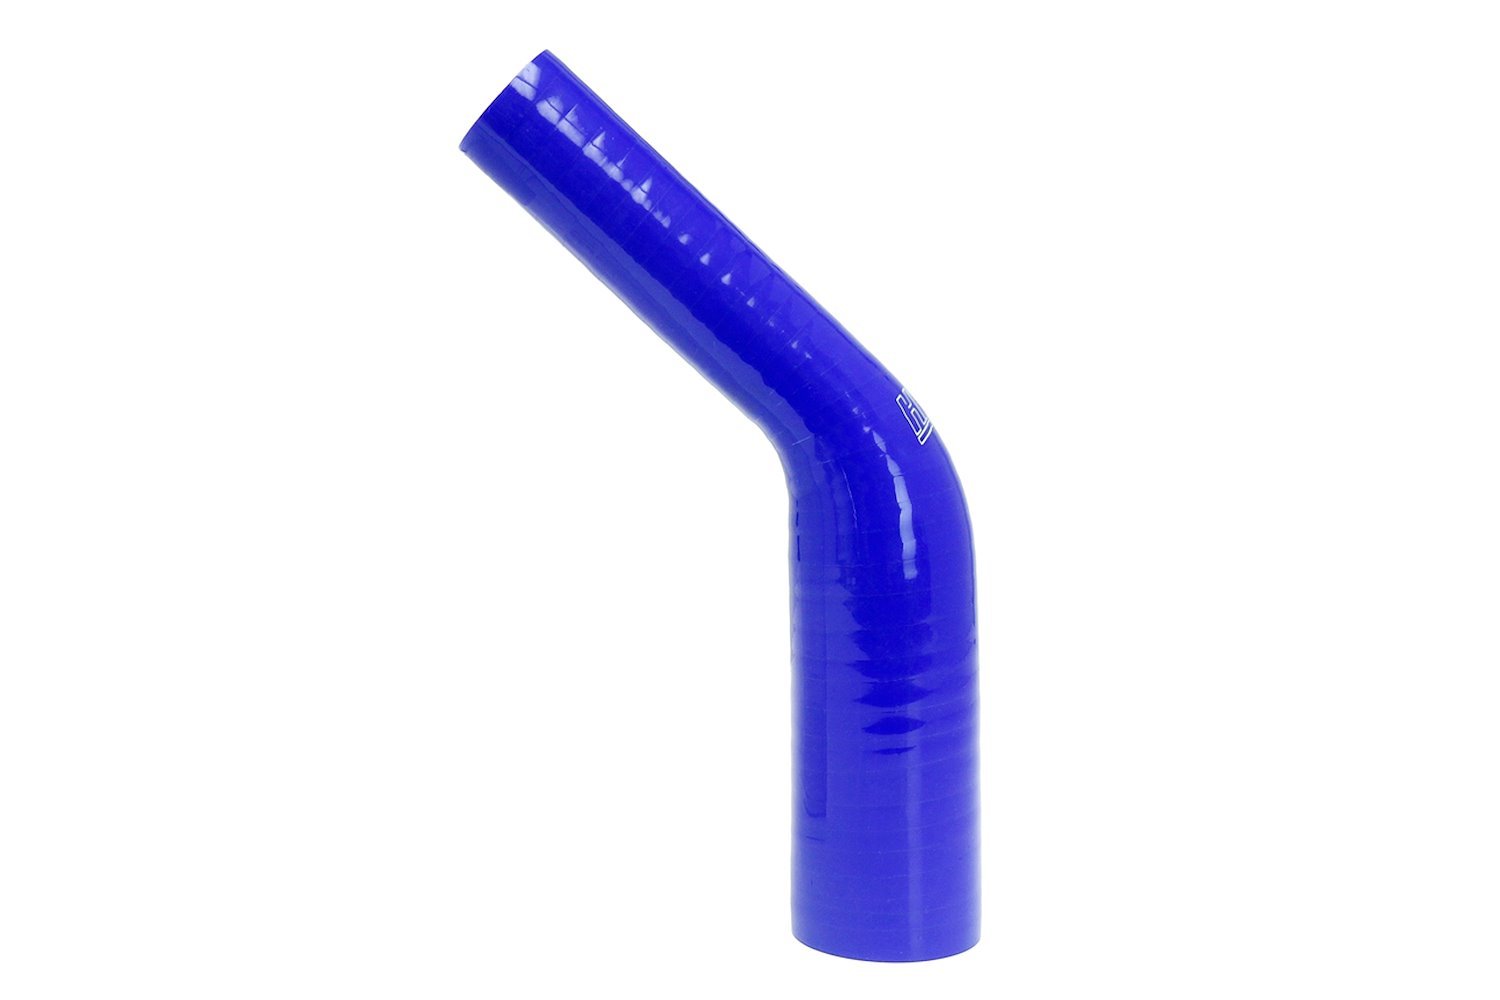 HTSER45-175-200-BLUE Silicone 45-Degree Elbow Hose, High-Temp 4-Ply Reinforced, 1-3/4 in. - 2 in. ID, Blue